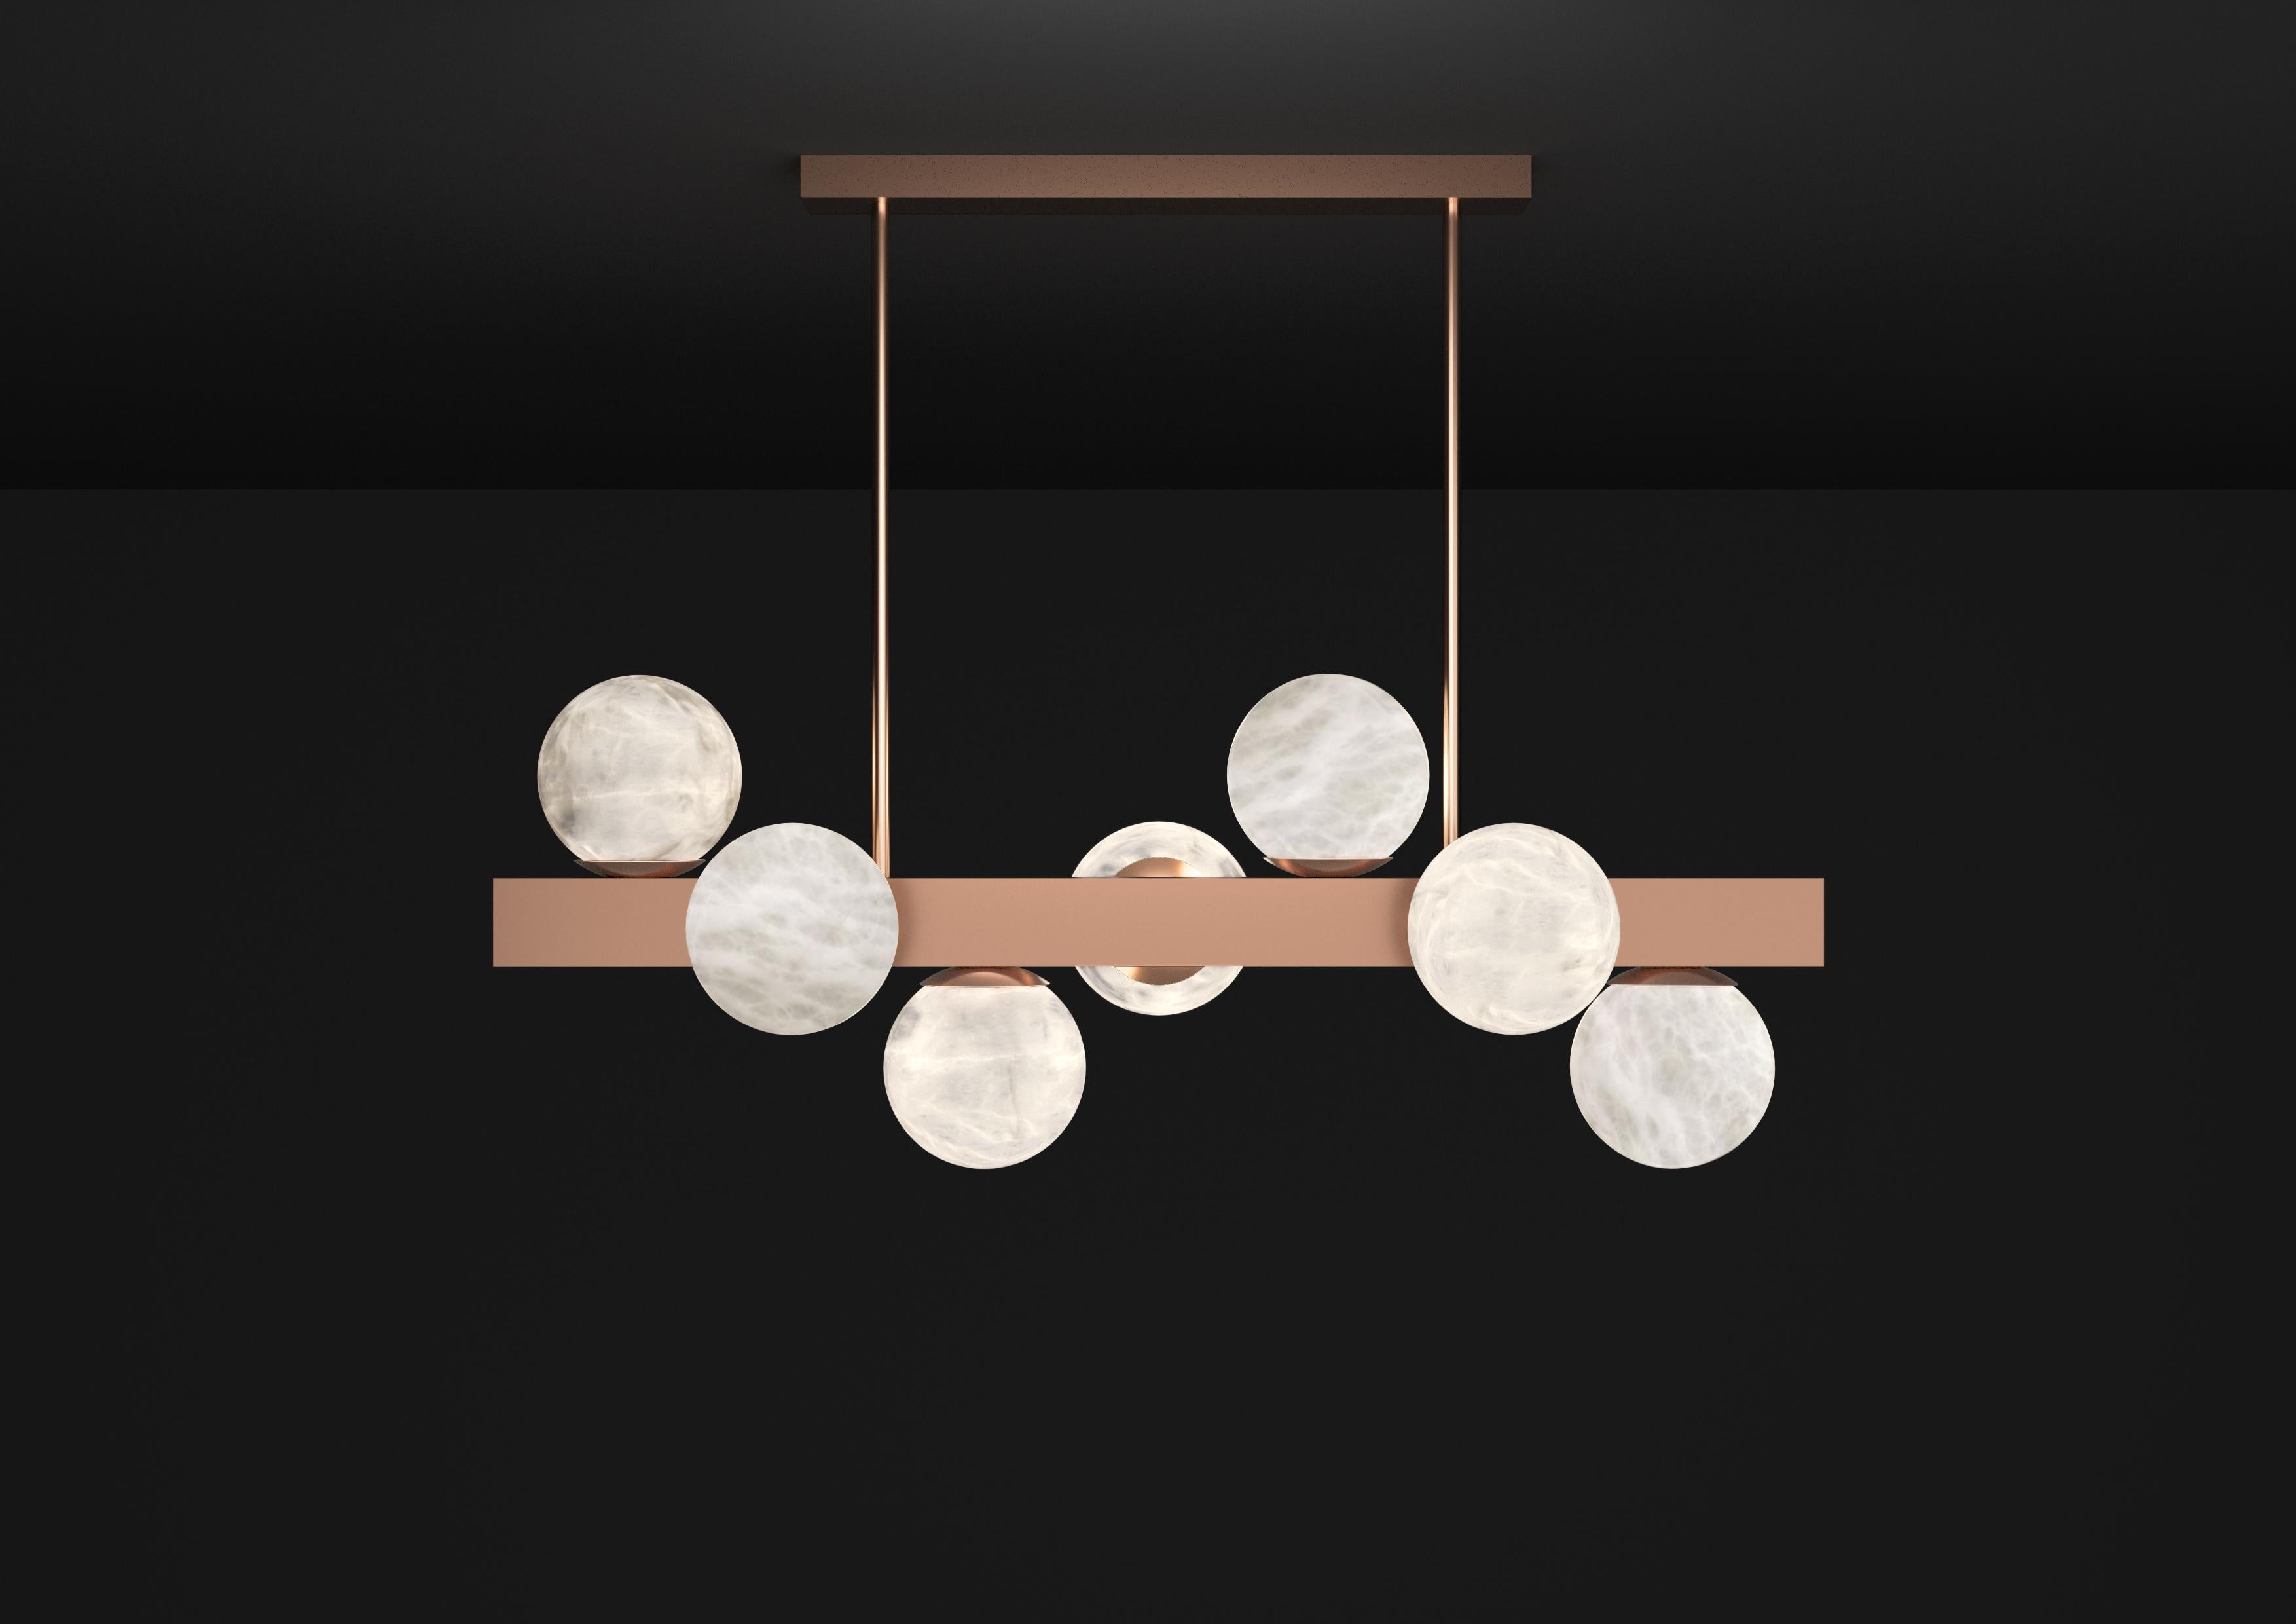 Dioniso Copper Pendant Lamp by Alabastro Italiano
Dimensions: D 35 x W 91 x H 36 cm.
Materials: White alabaster and copper.

Available in different finishes: Shiny Silver, Bronze, Brushed Brass, Ruggine of Florence, Brushed Burnished, Shiny Gold,